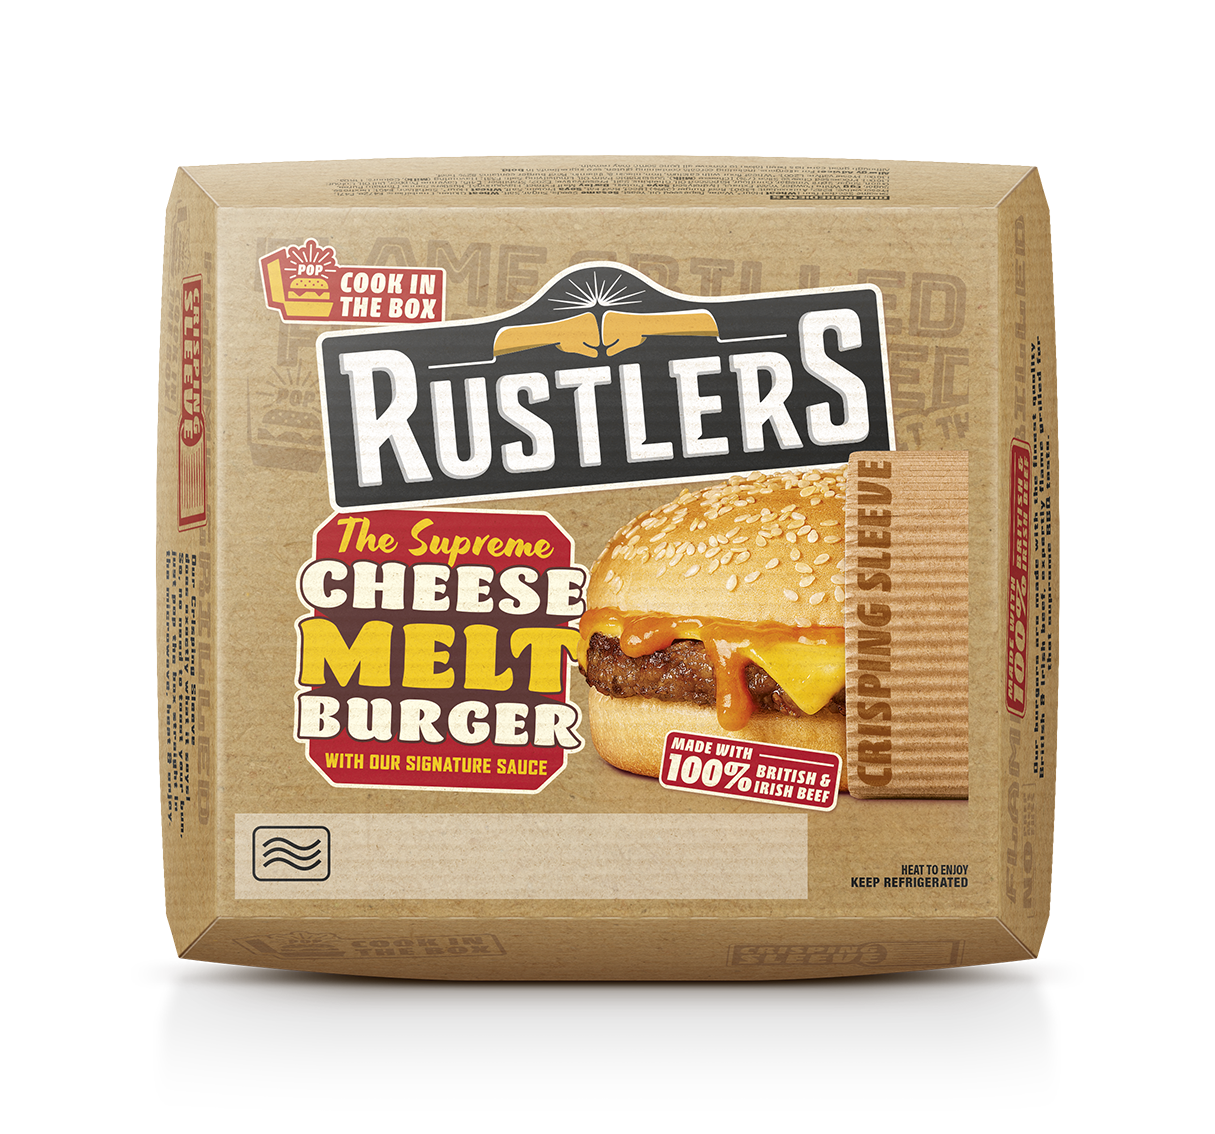 Rustlers bolsters FTG with cook-in-box concept